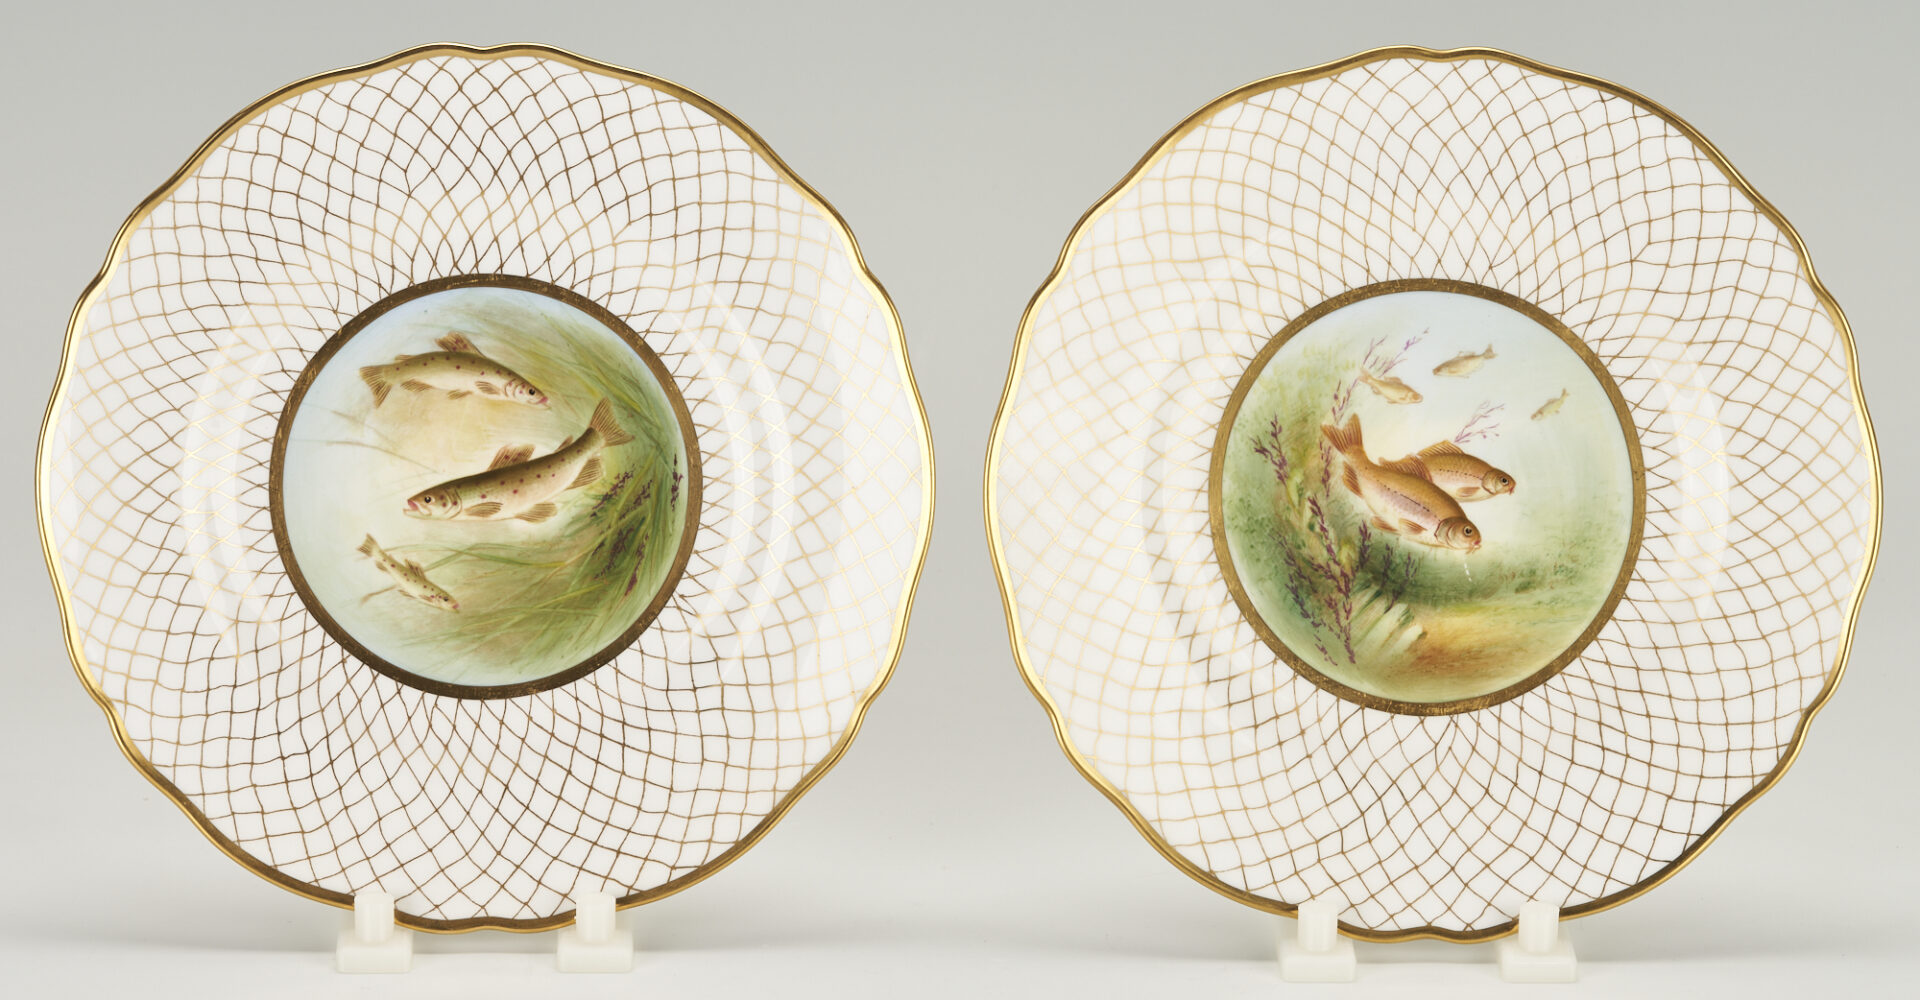 Lot 865: 10 Pcs of English Porcelain Incl. Spode Bone China Fish Plates & 2 Floral Encrusted Stag Cups